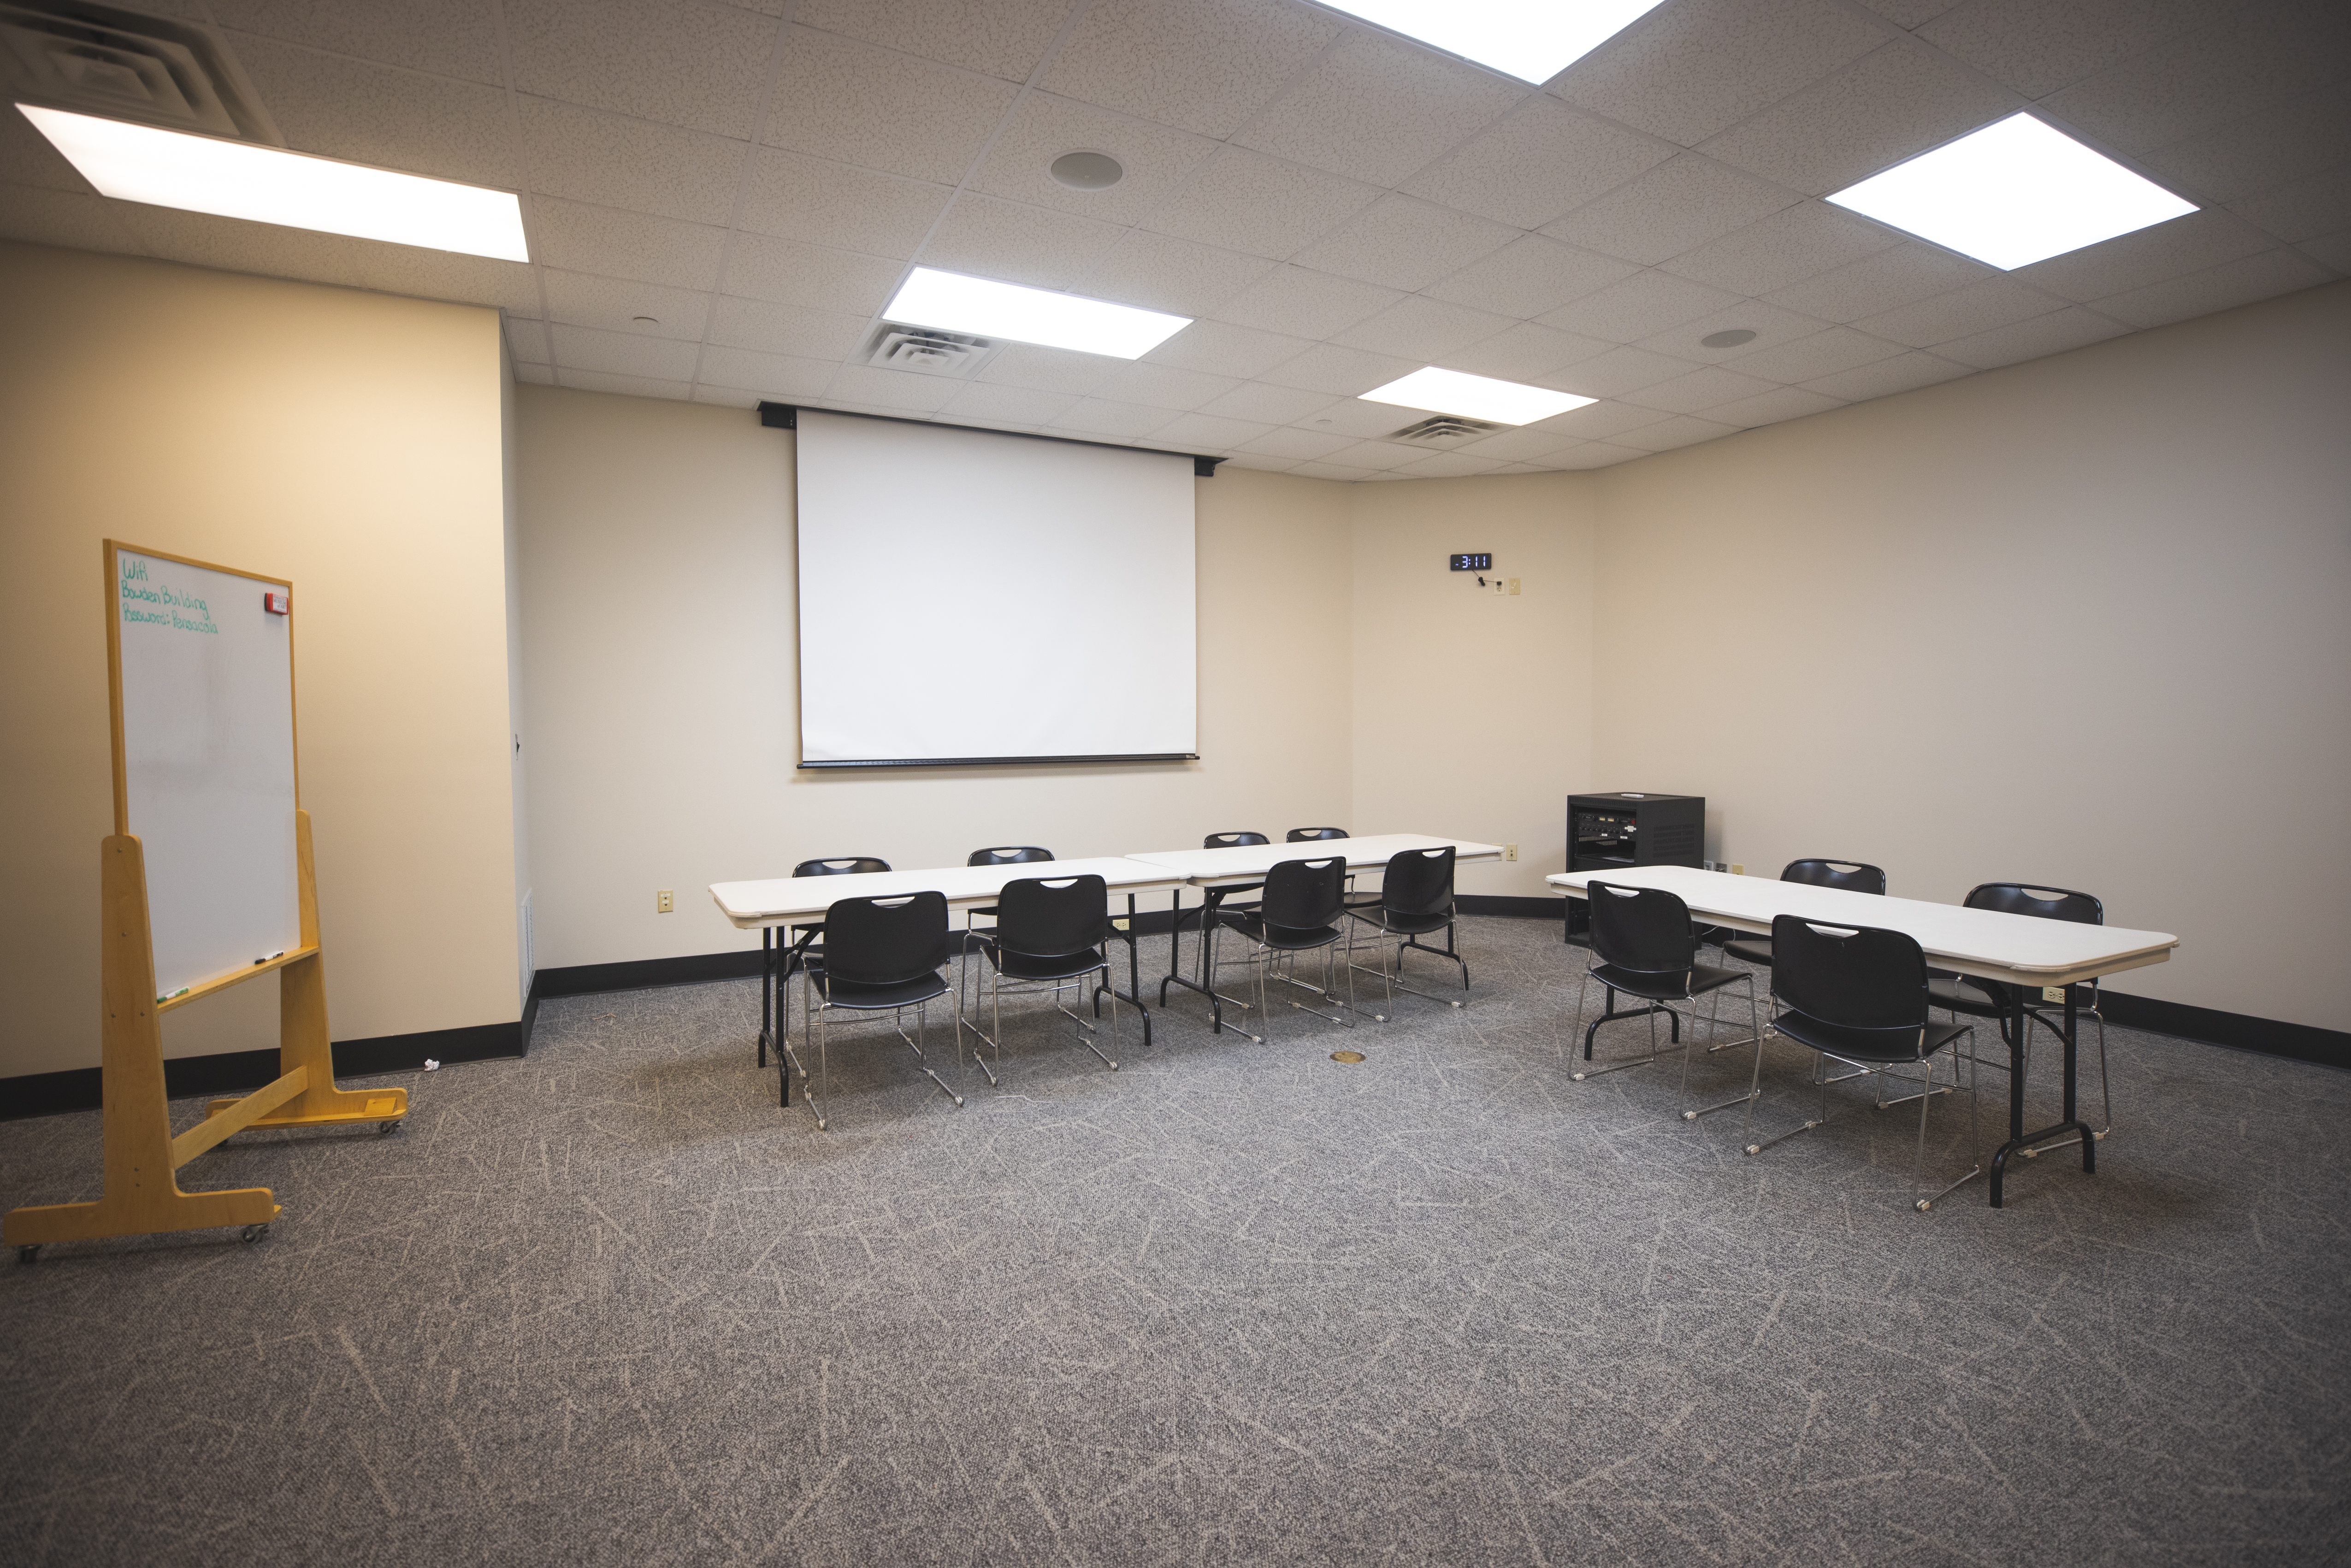 A photo of the small classroom at he Bowden Building